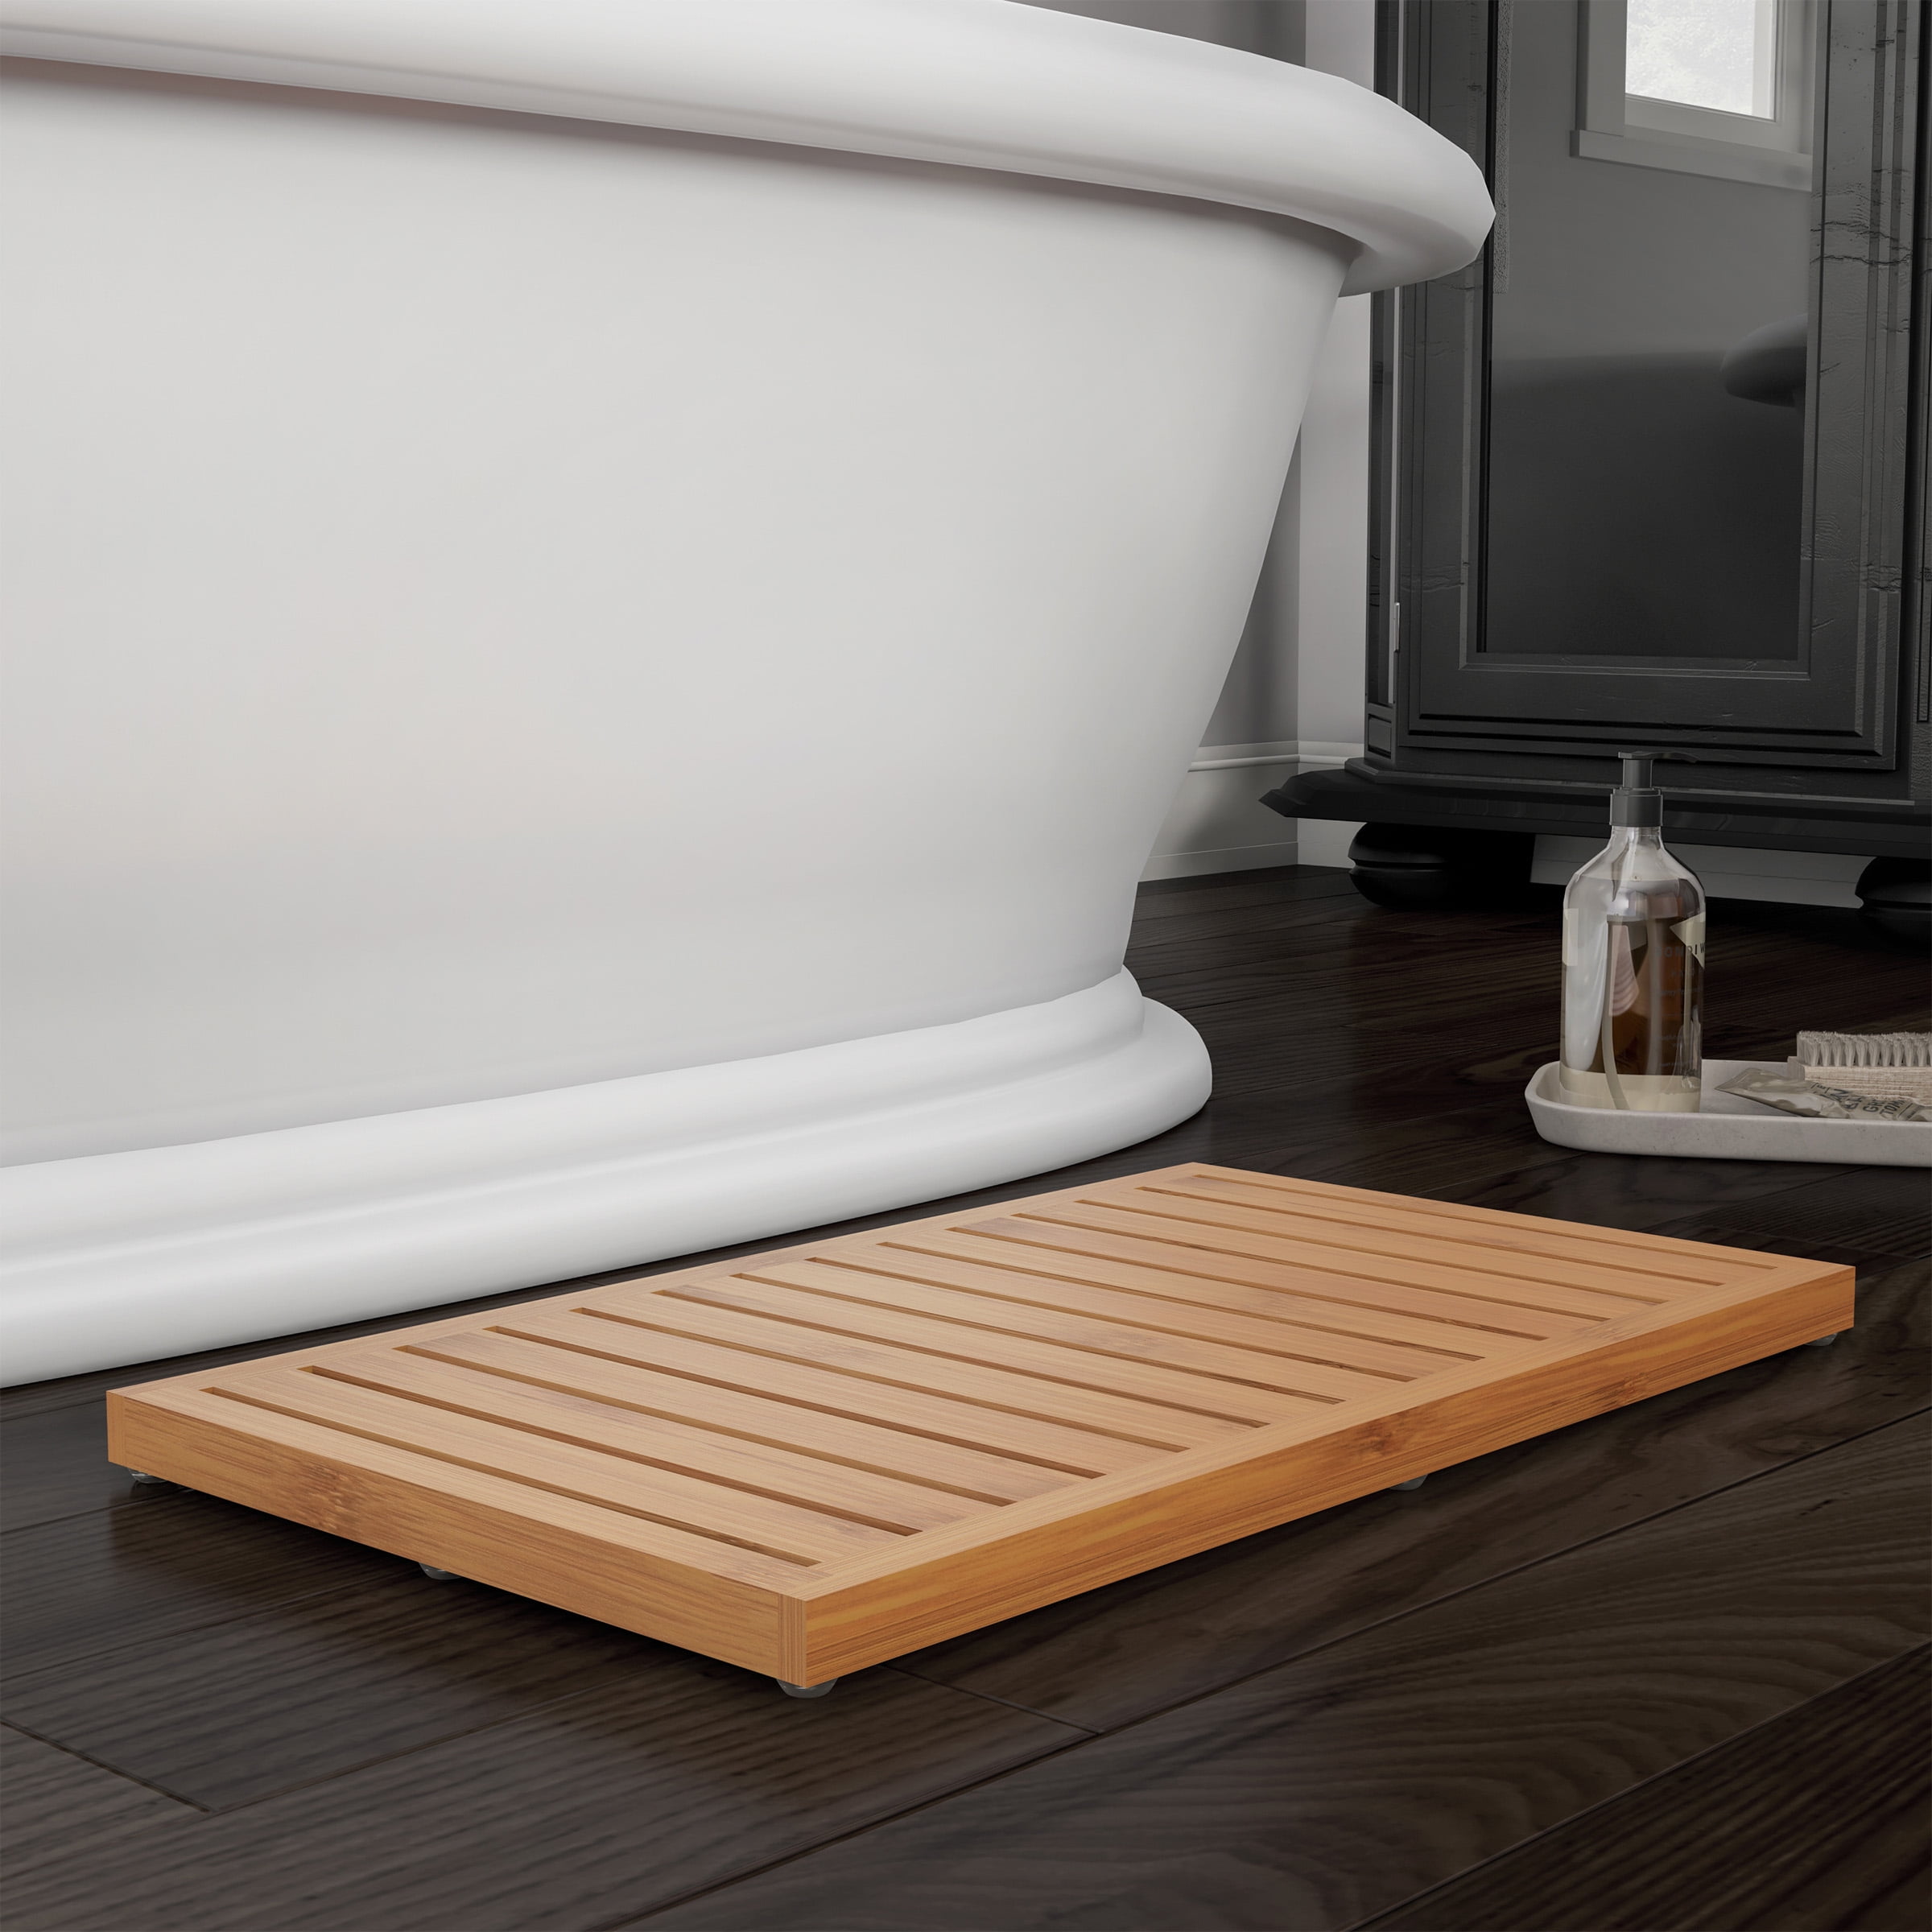 Bamboo Bath Mat Natural Wooden NonSlip Roll Up with